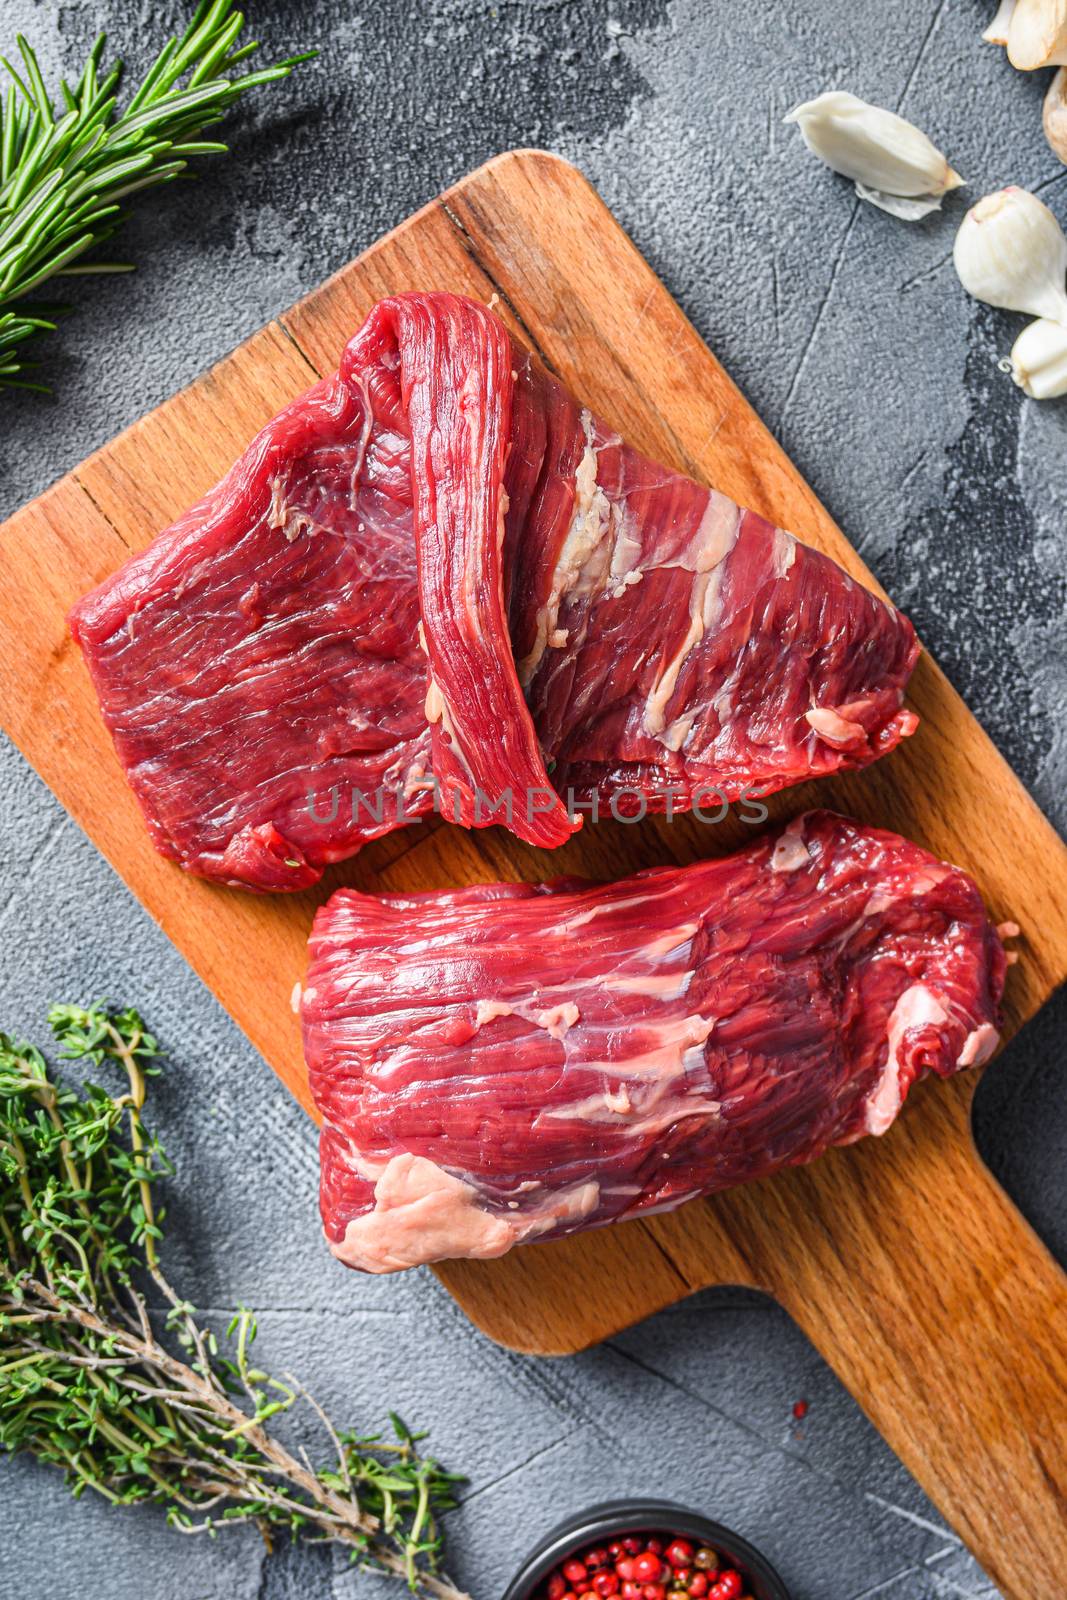 Raw flap steak flank cutHanger steak, bistro steak, fajita meat, on woods chopping board, with herbs tomatoes peppercorns over grey stone surface background top view close up.